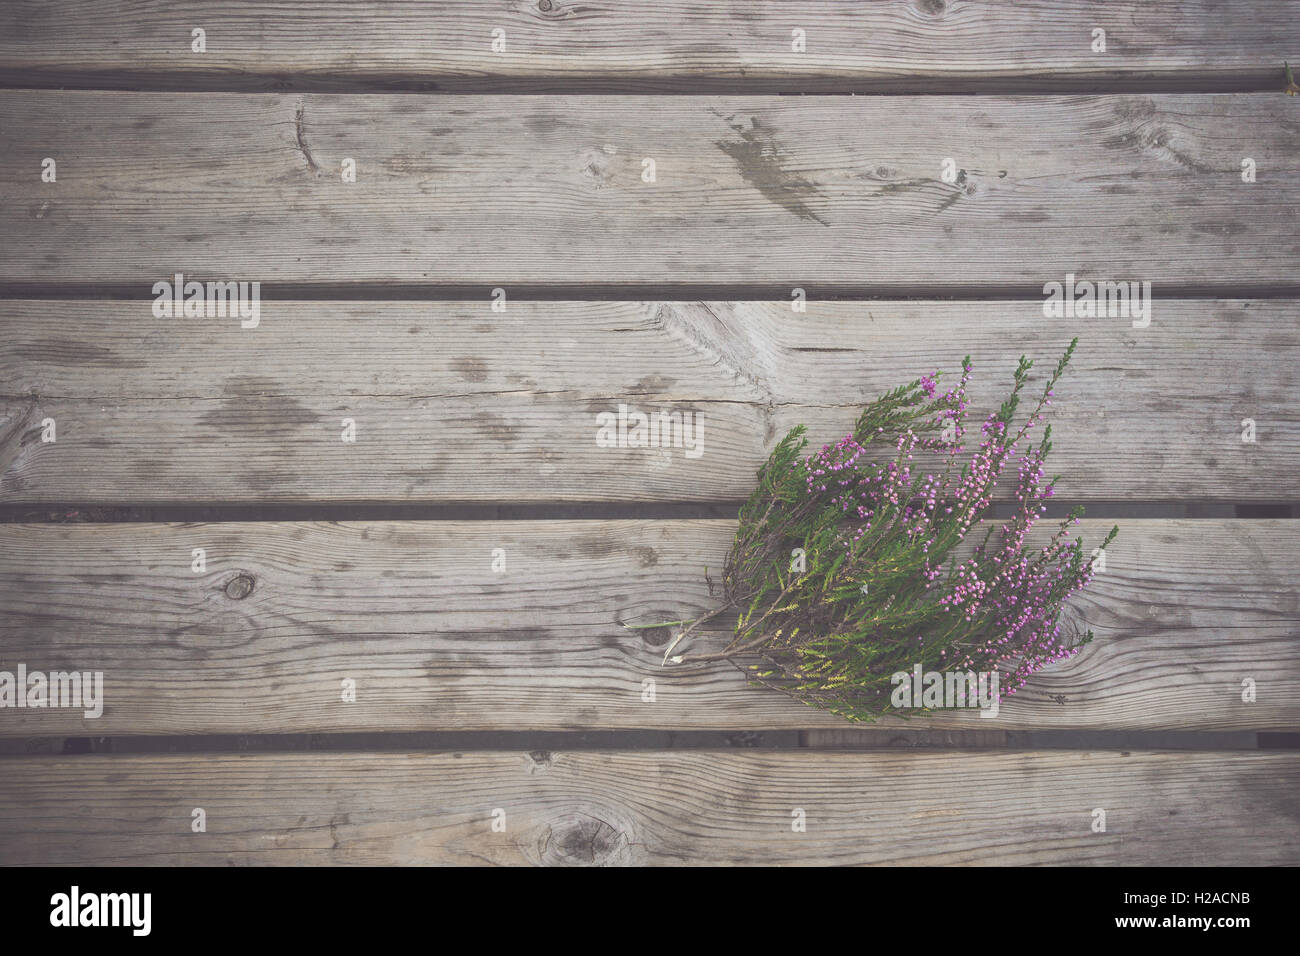 Heather plant with purple flowers on a wooden background Stock Photo